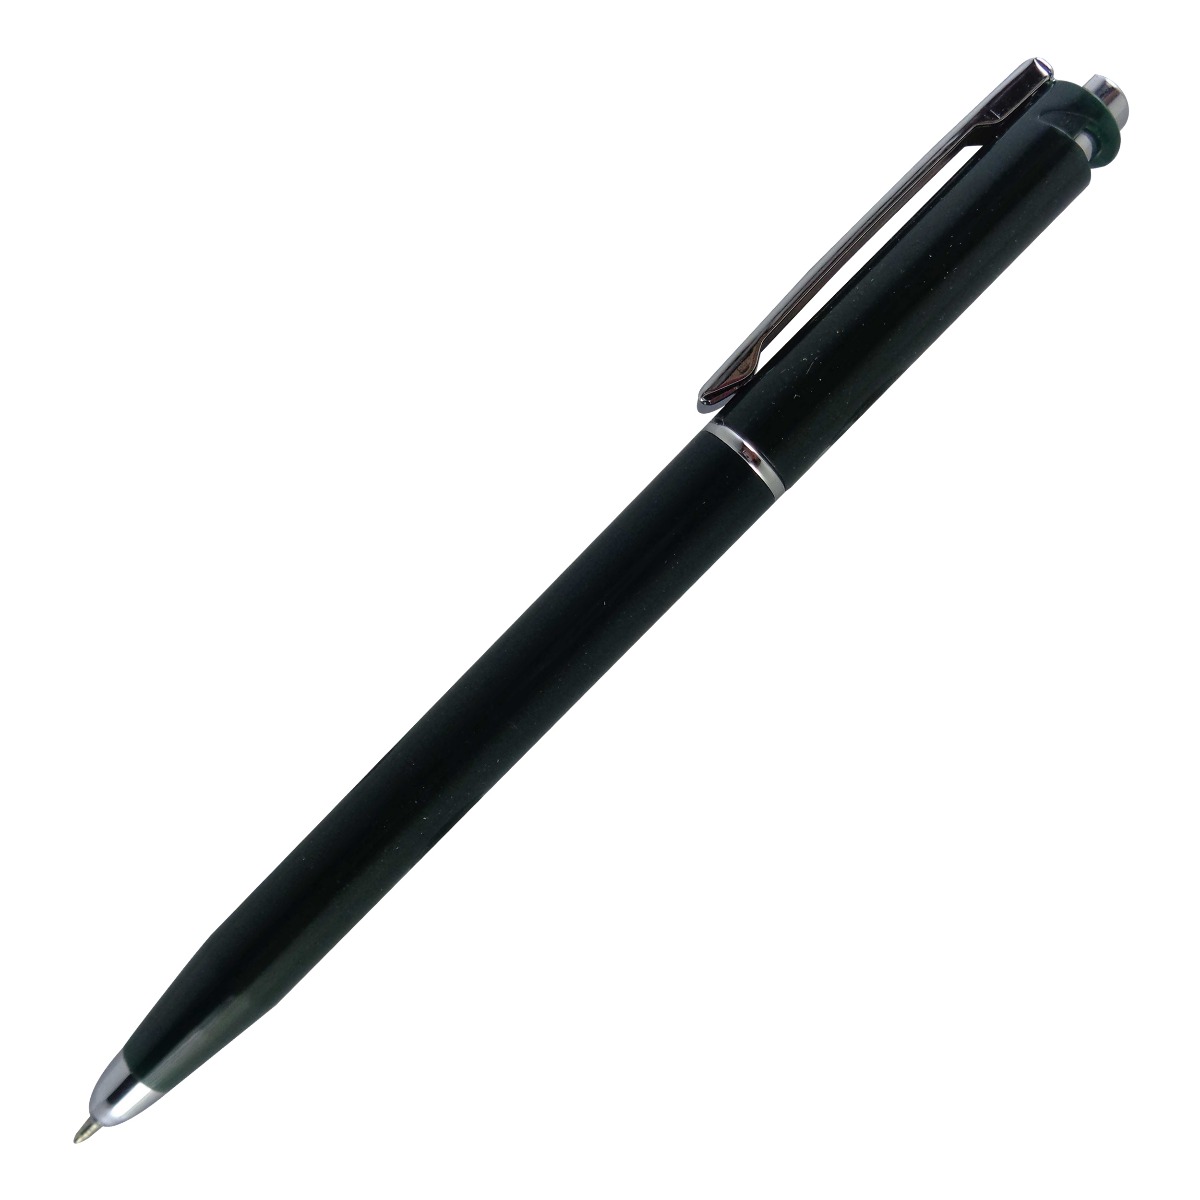 Reynolds Model: 15050 Jetter classic Green color body with silver clip fine tip retractable ball pen